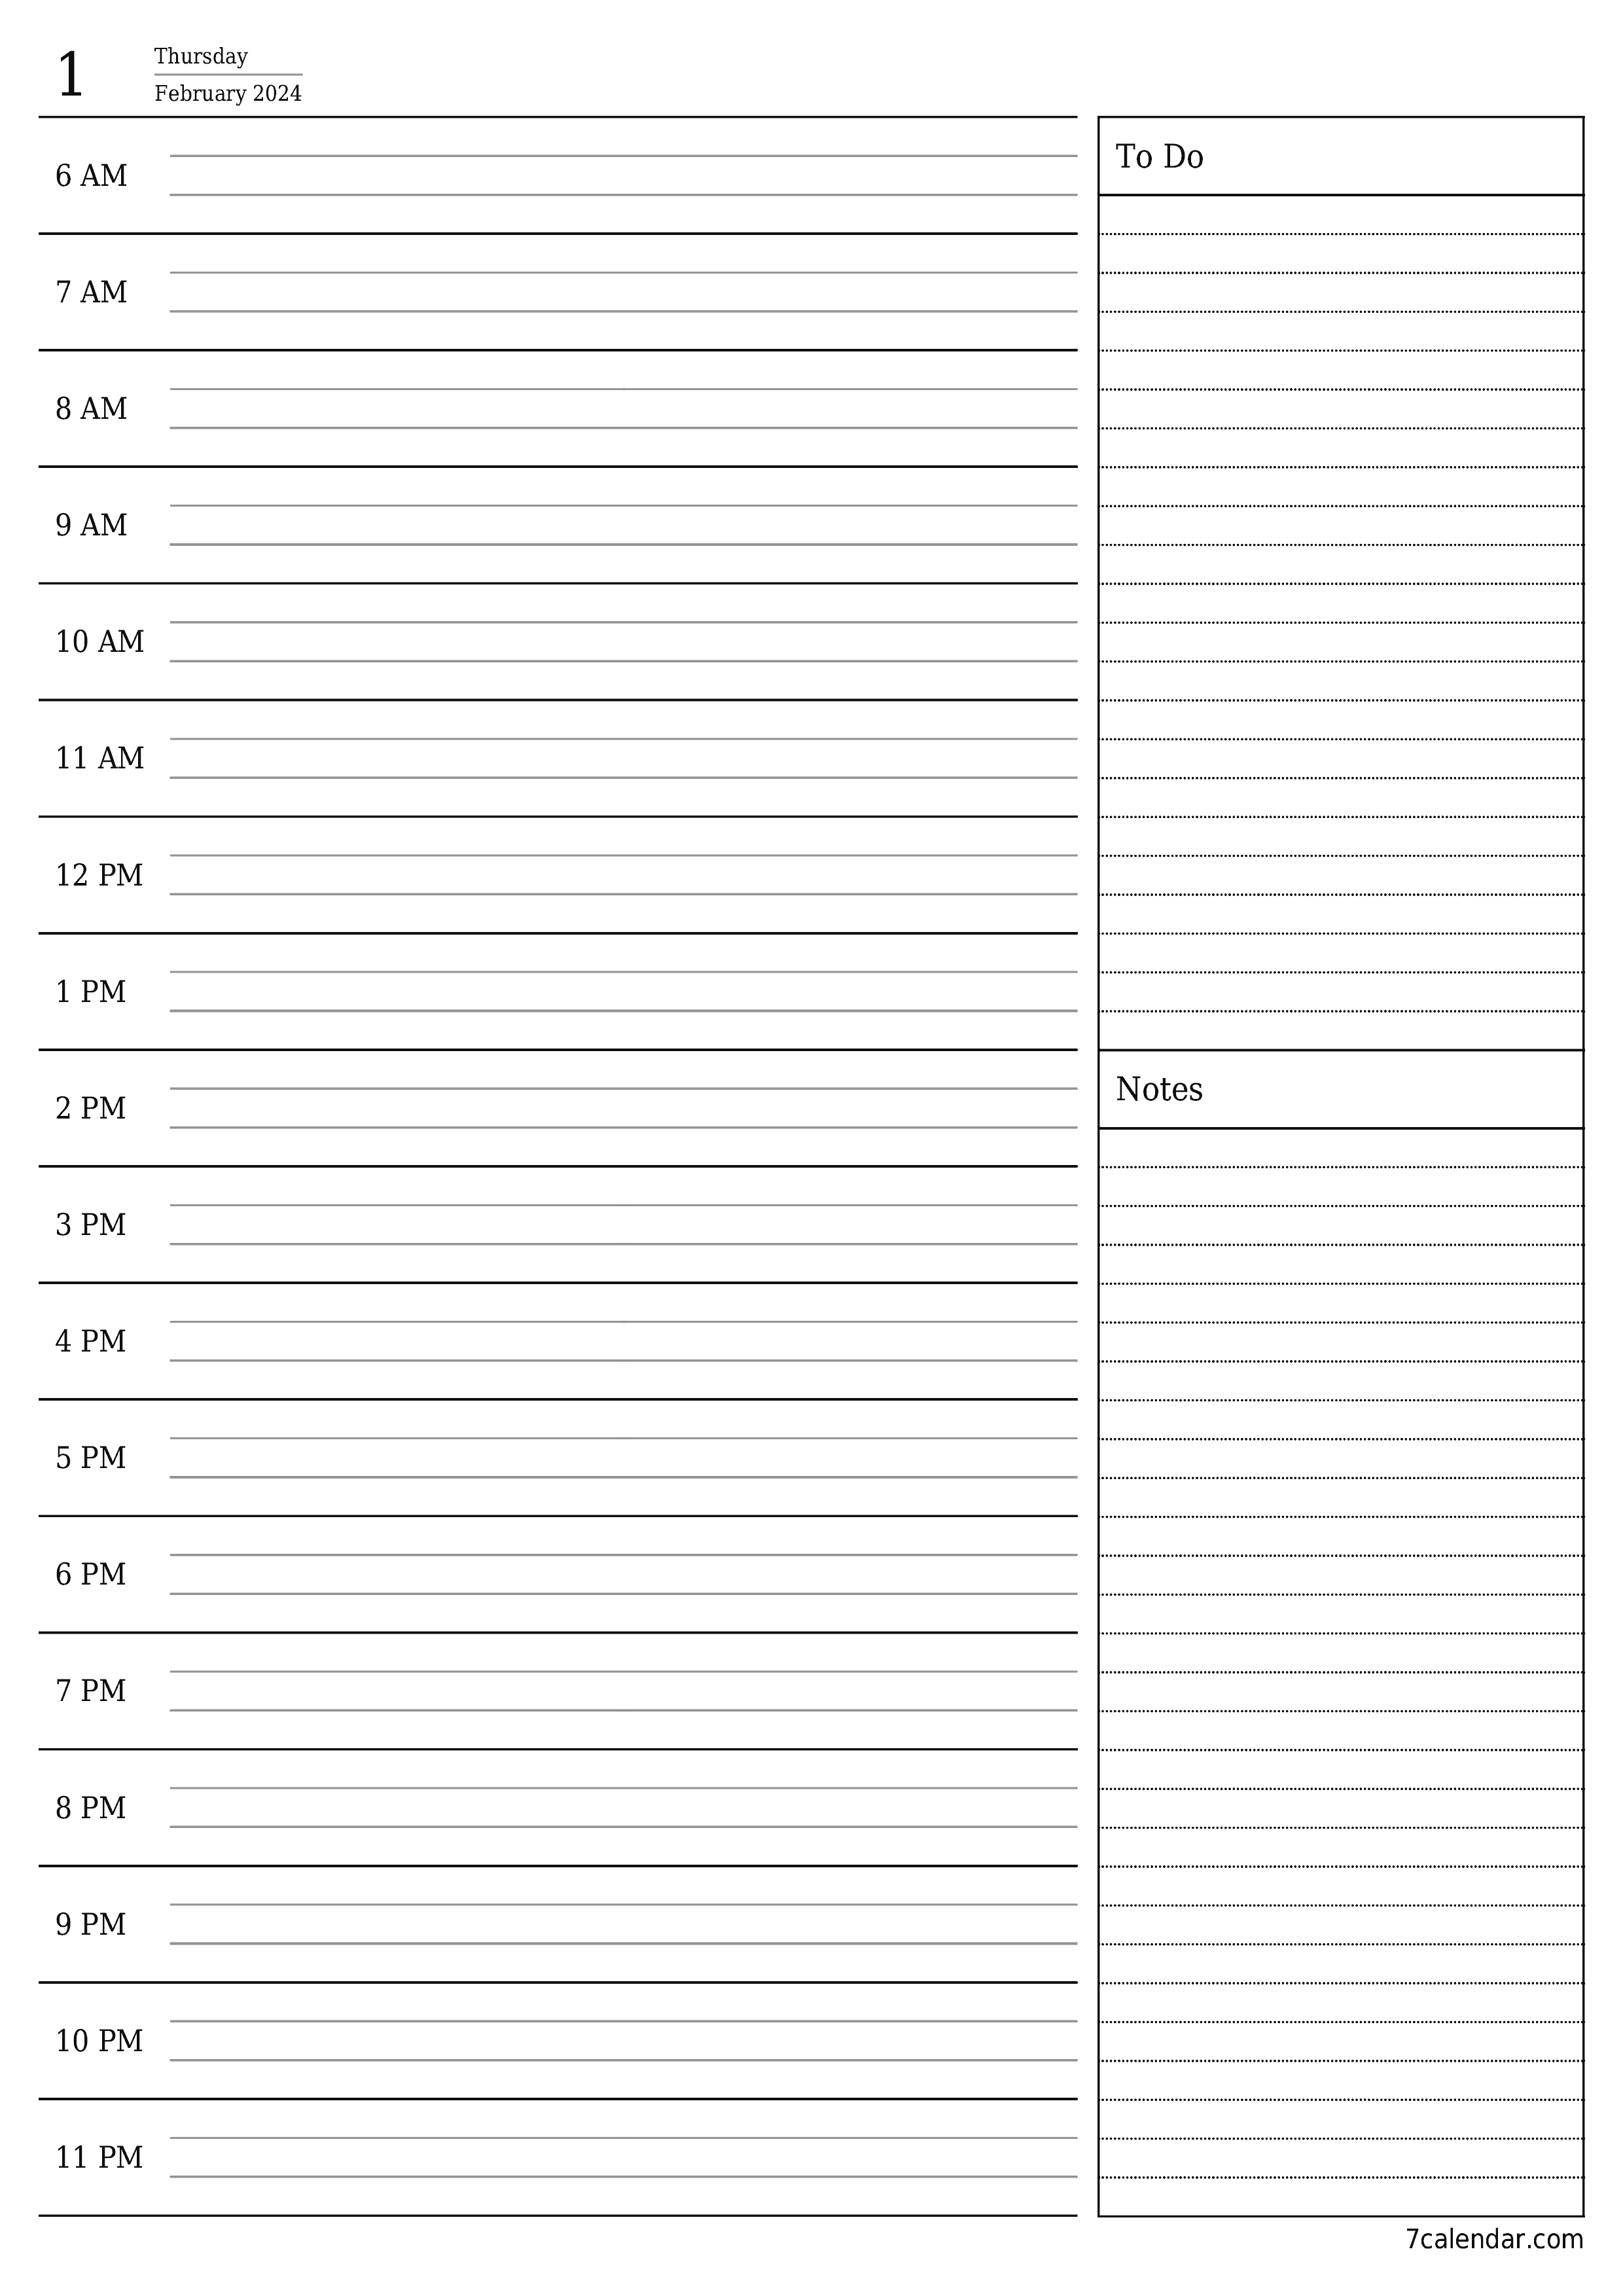 Blank daily printable calendar and planner for day February 2024 with notes, save and print to PDF PNG English